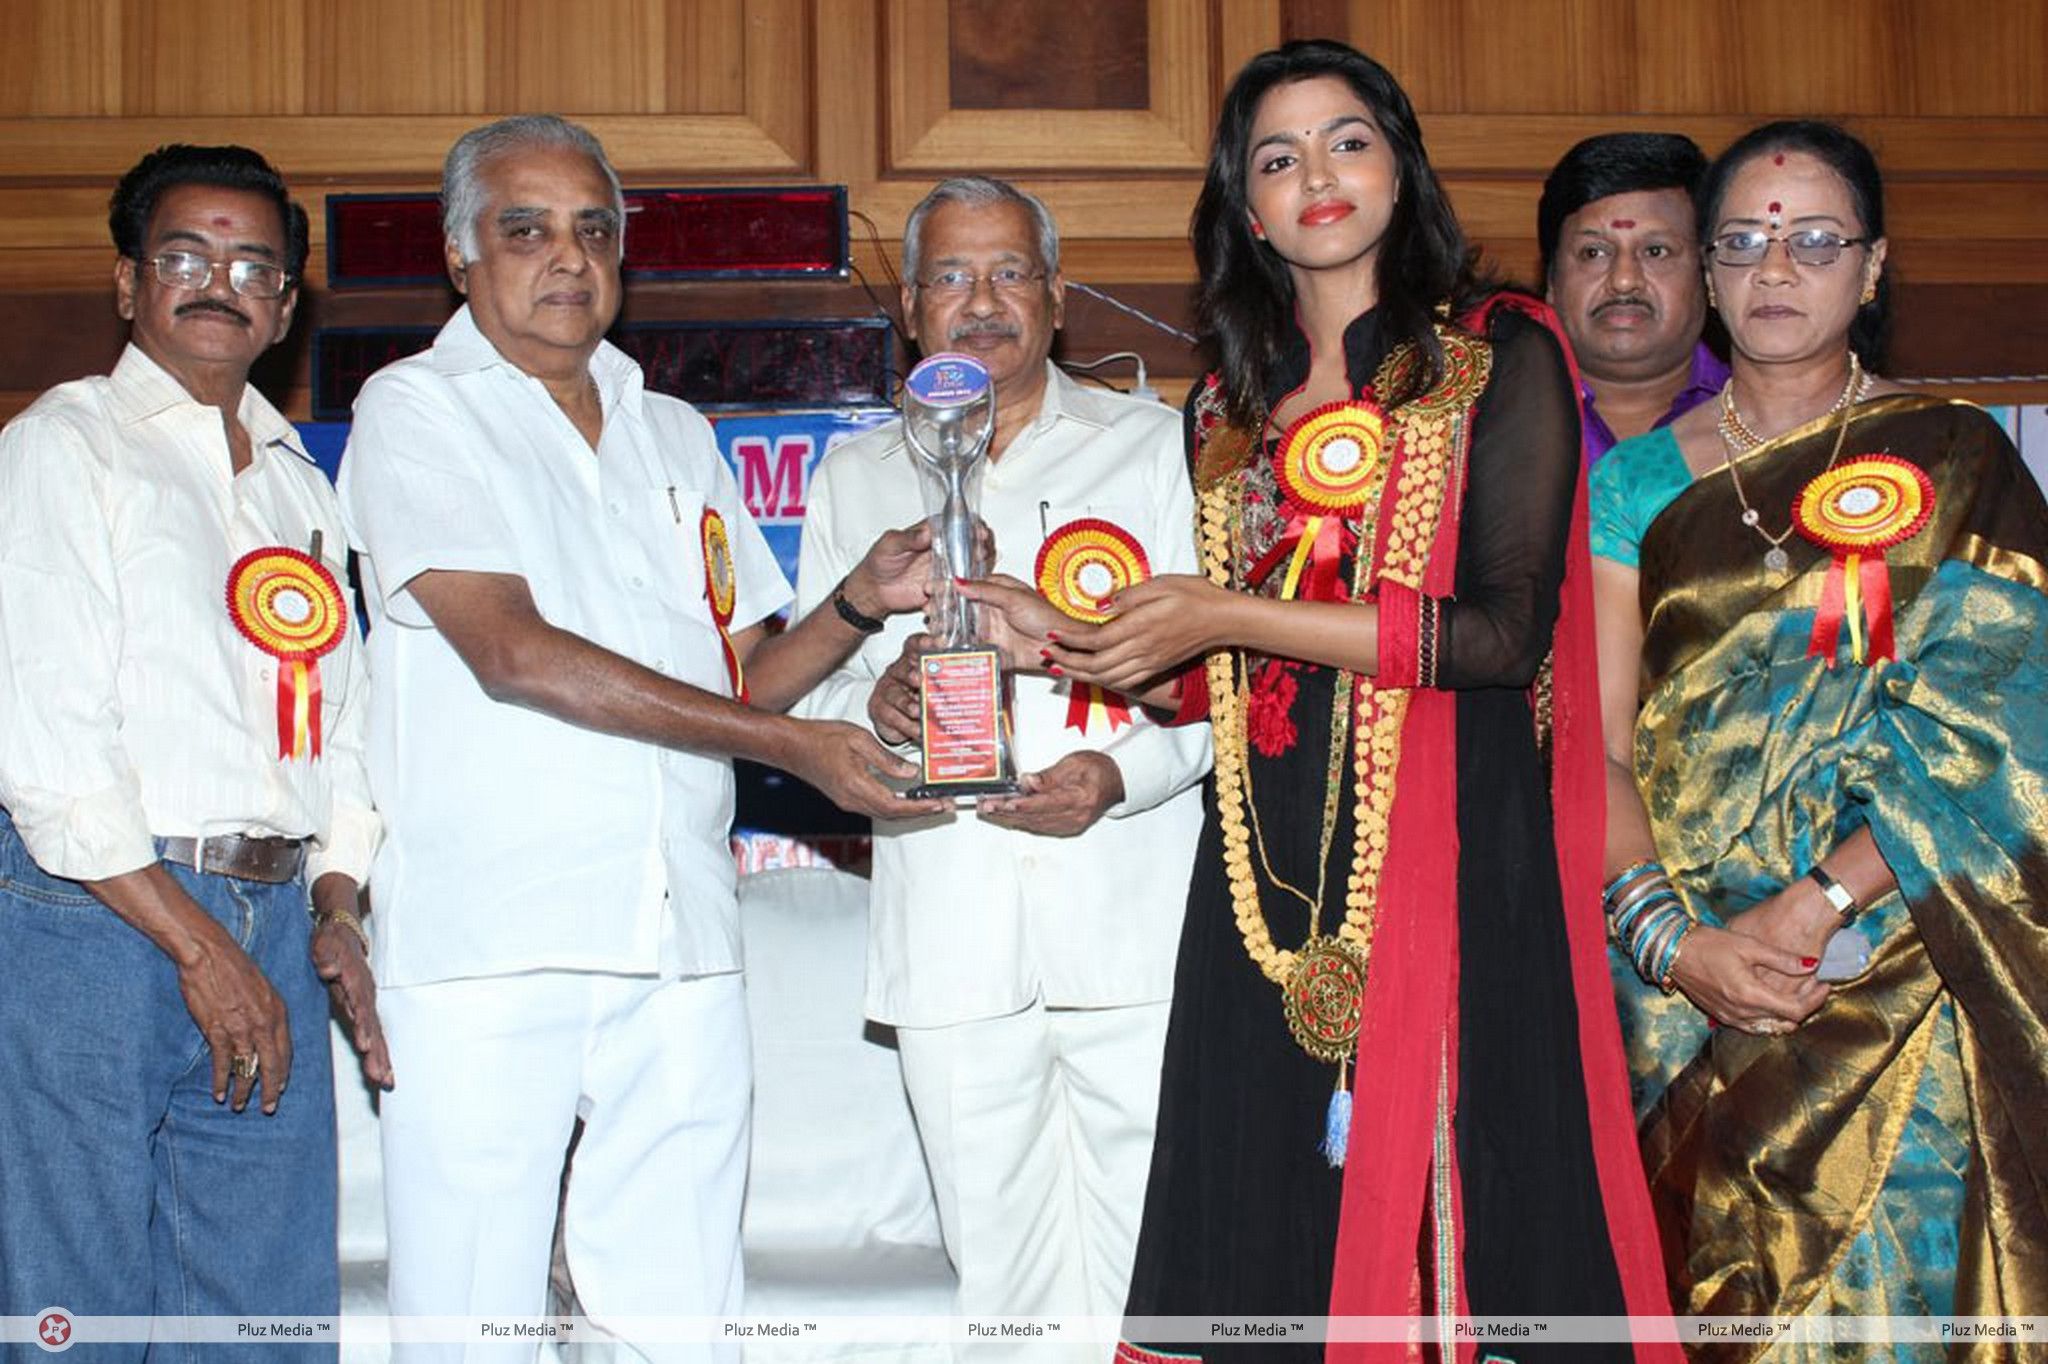 Benze Vaccations Club Awards 2013 Stills | Picture 354486